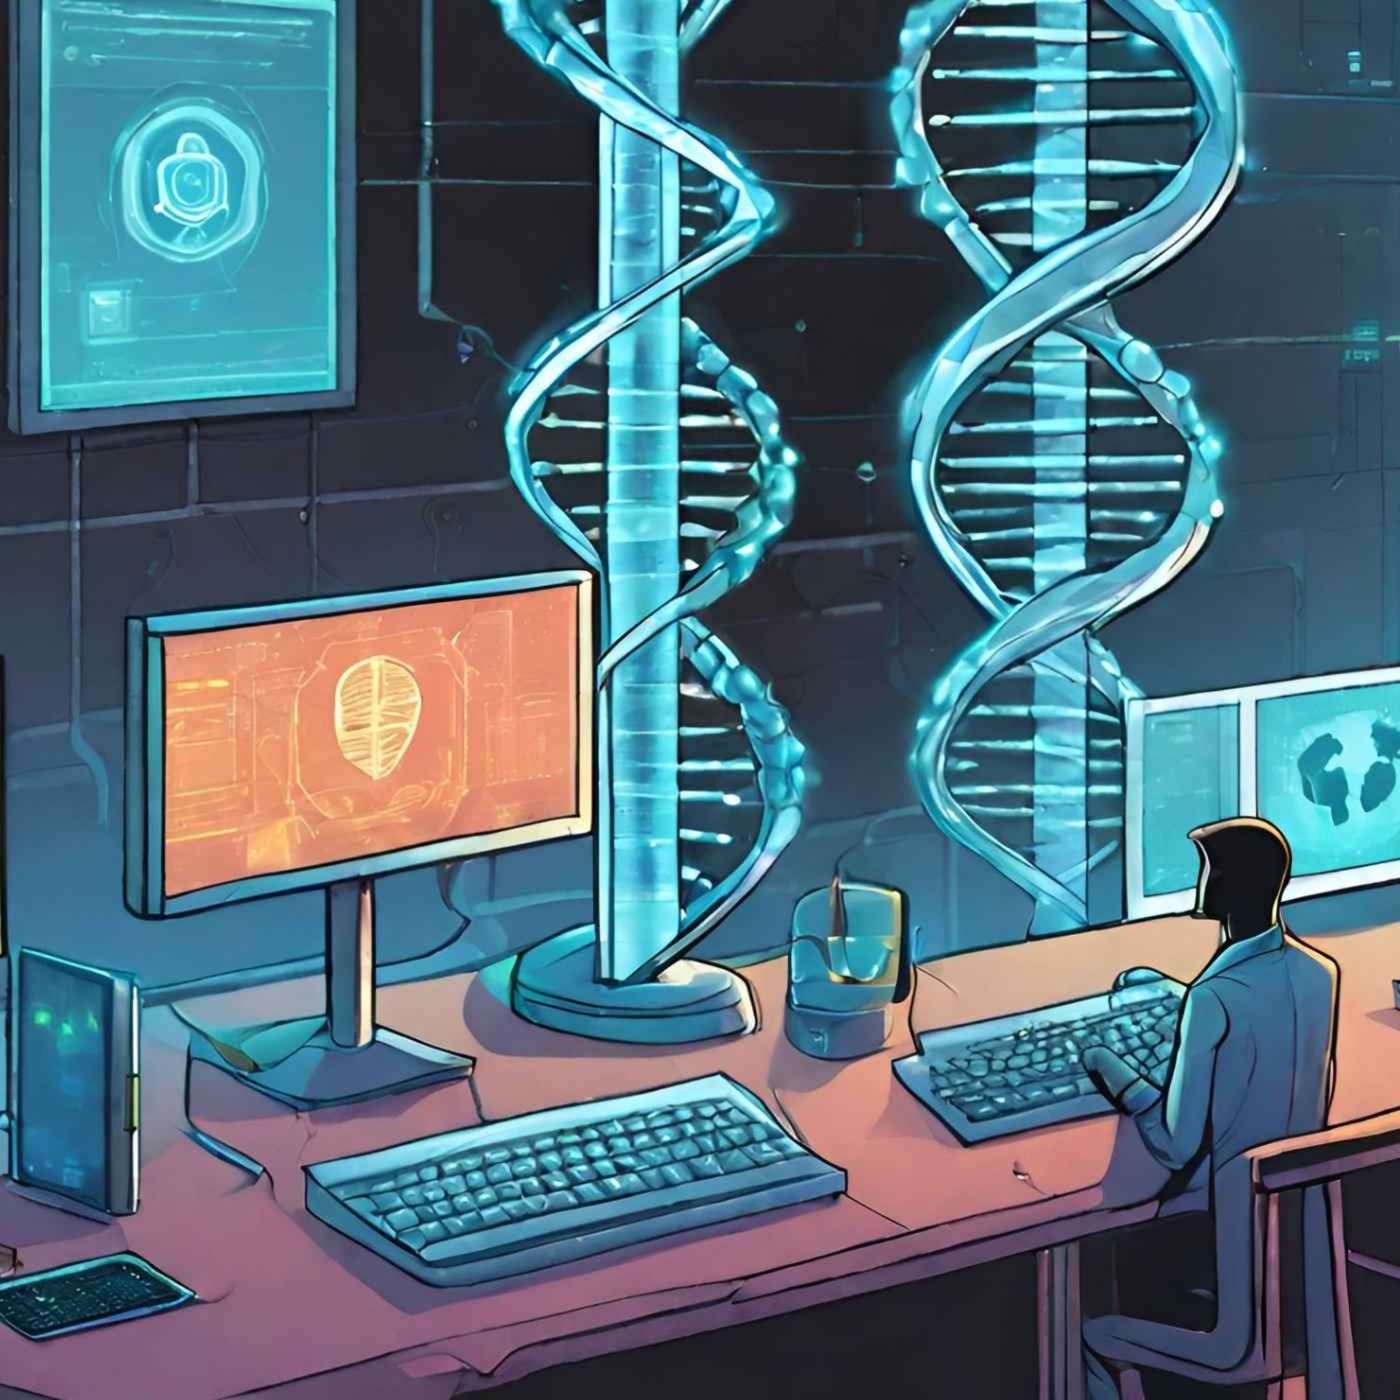 Ep. #650: HACKING THE GENOME w/ James F. Ponder